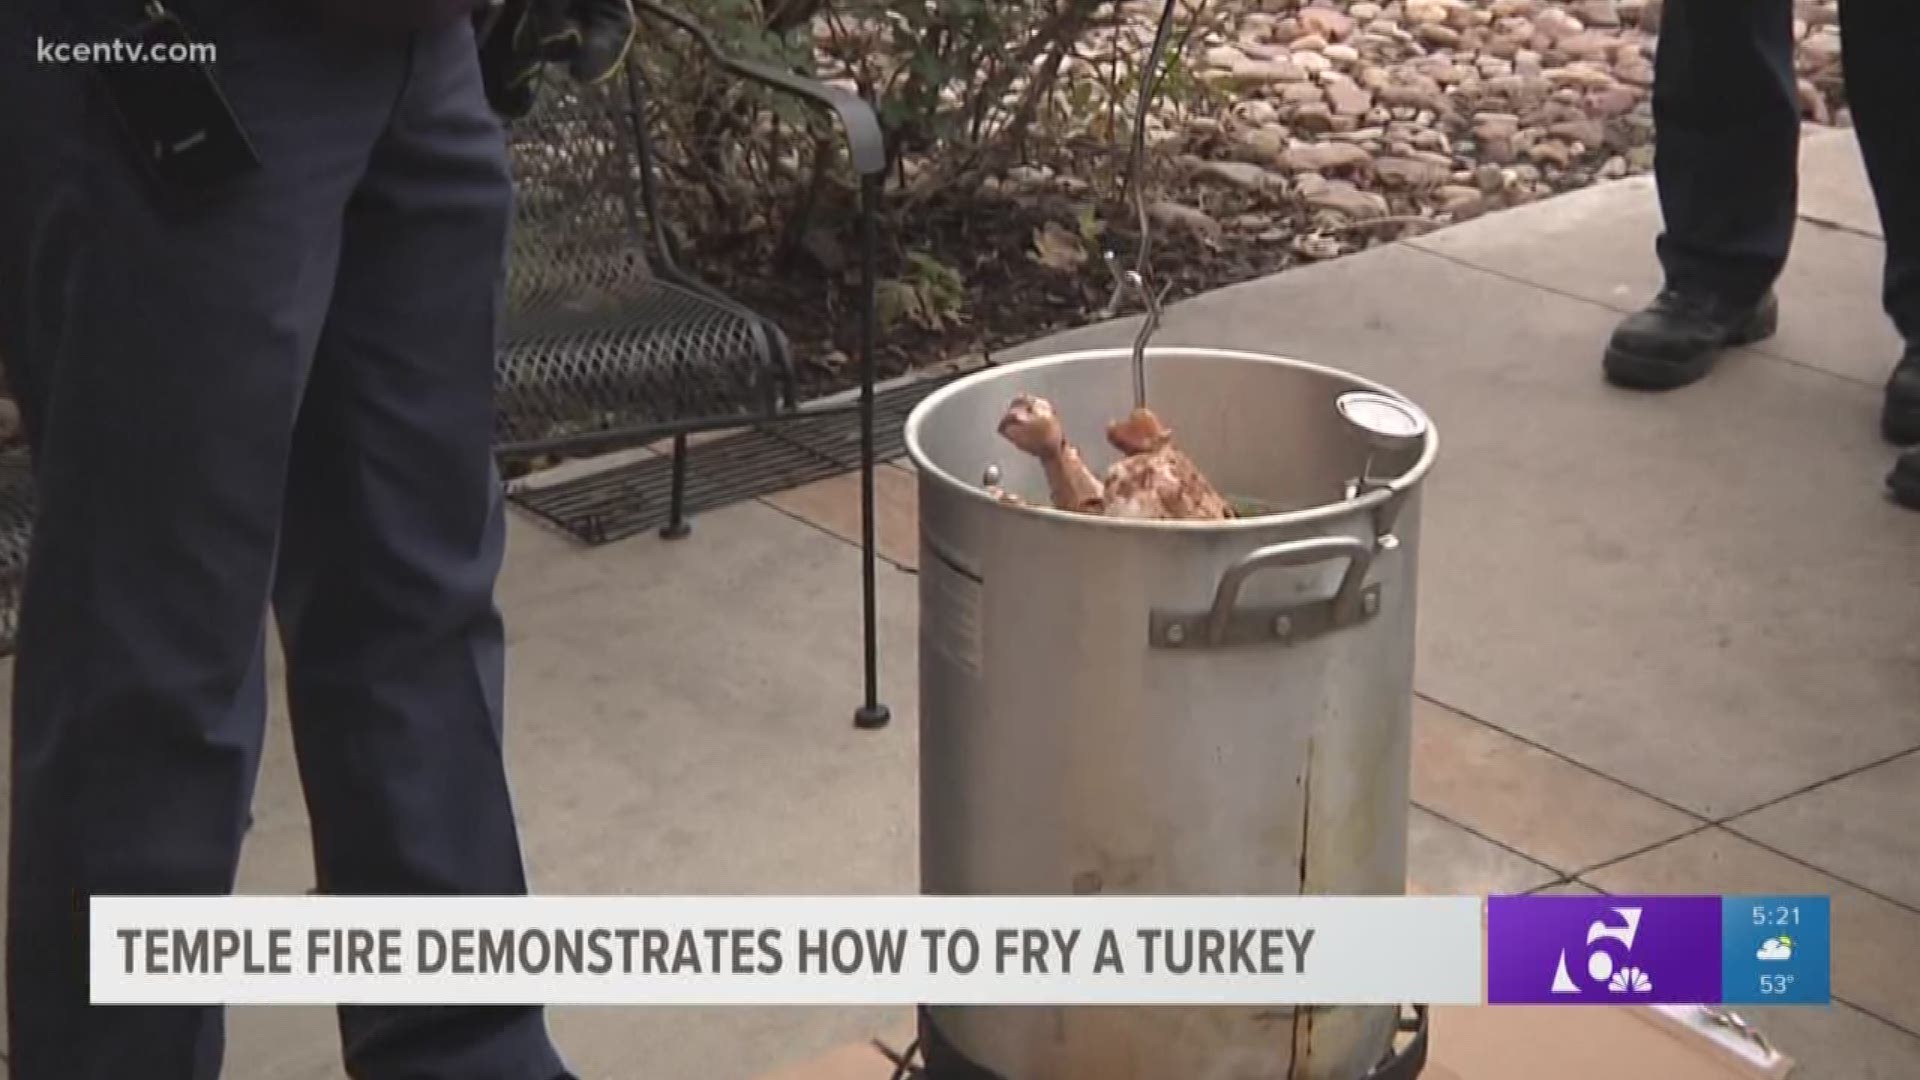 Thanksgiving is the number one day for house fires caused by cooking. Temple fire showed how to do the job safely before turkey day.